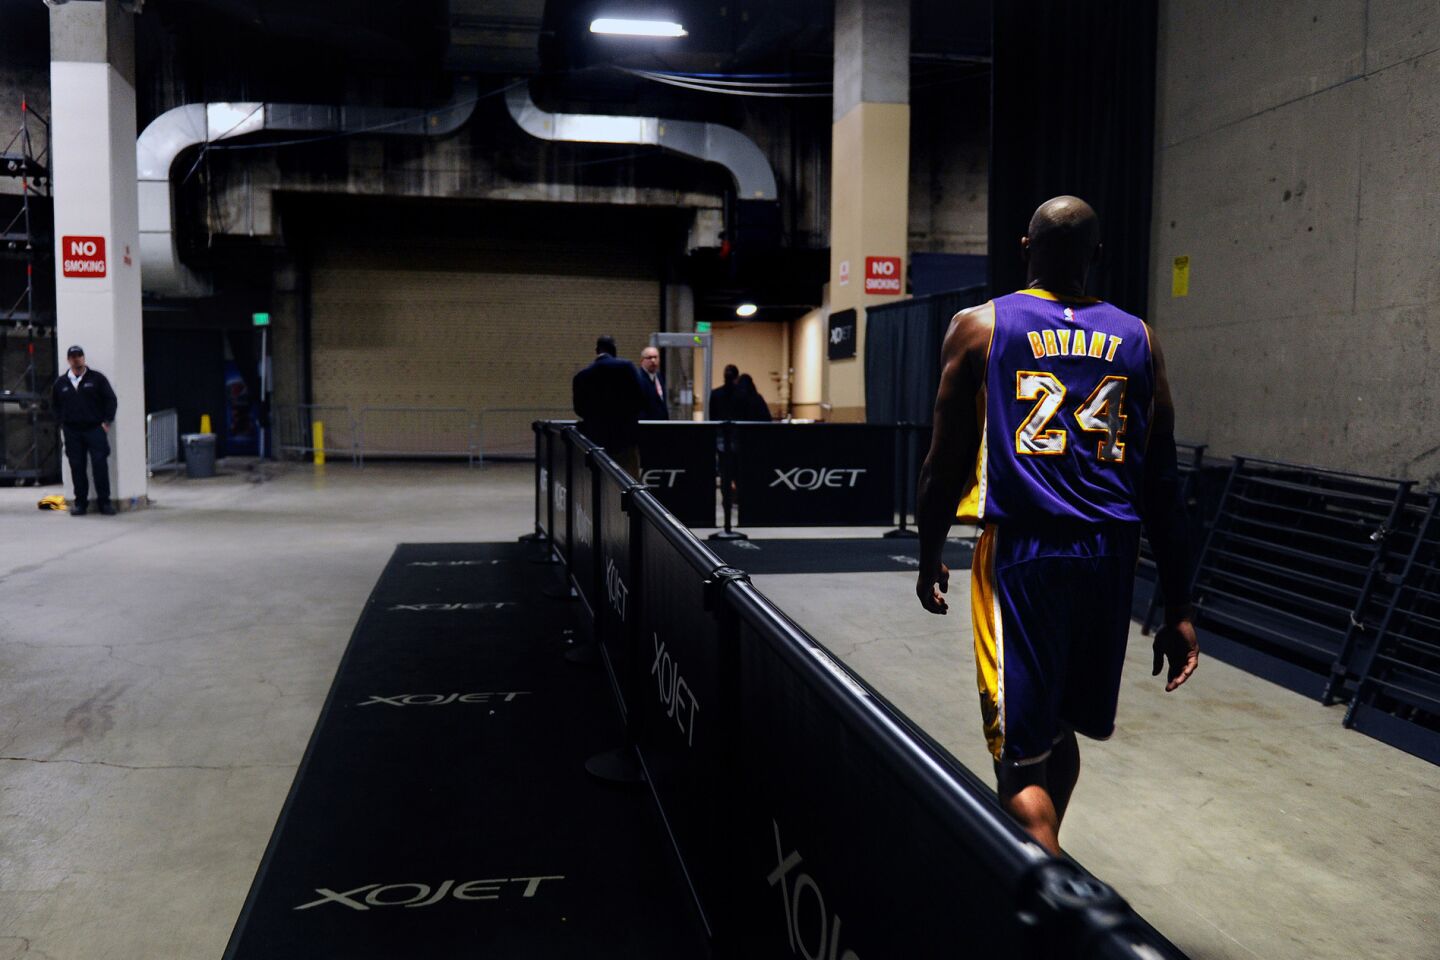 Kobe Bryant heads to the Oracle Arena locker room after the Lakers lost the Warriors, 116-98, in his final game in Oakland on Jan. 14, 2016.